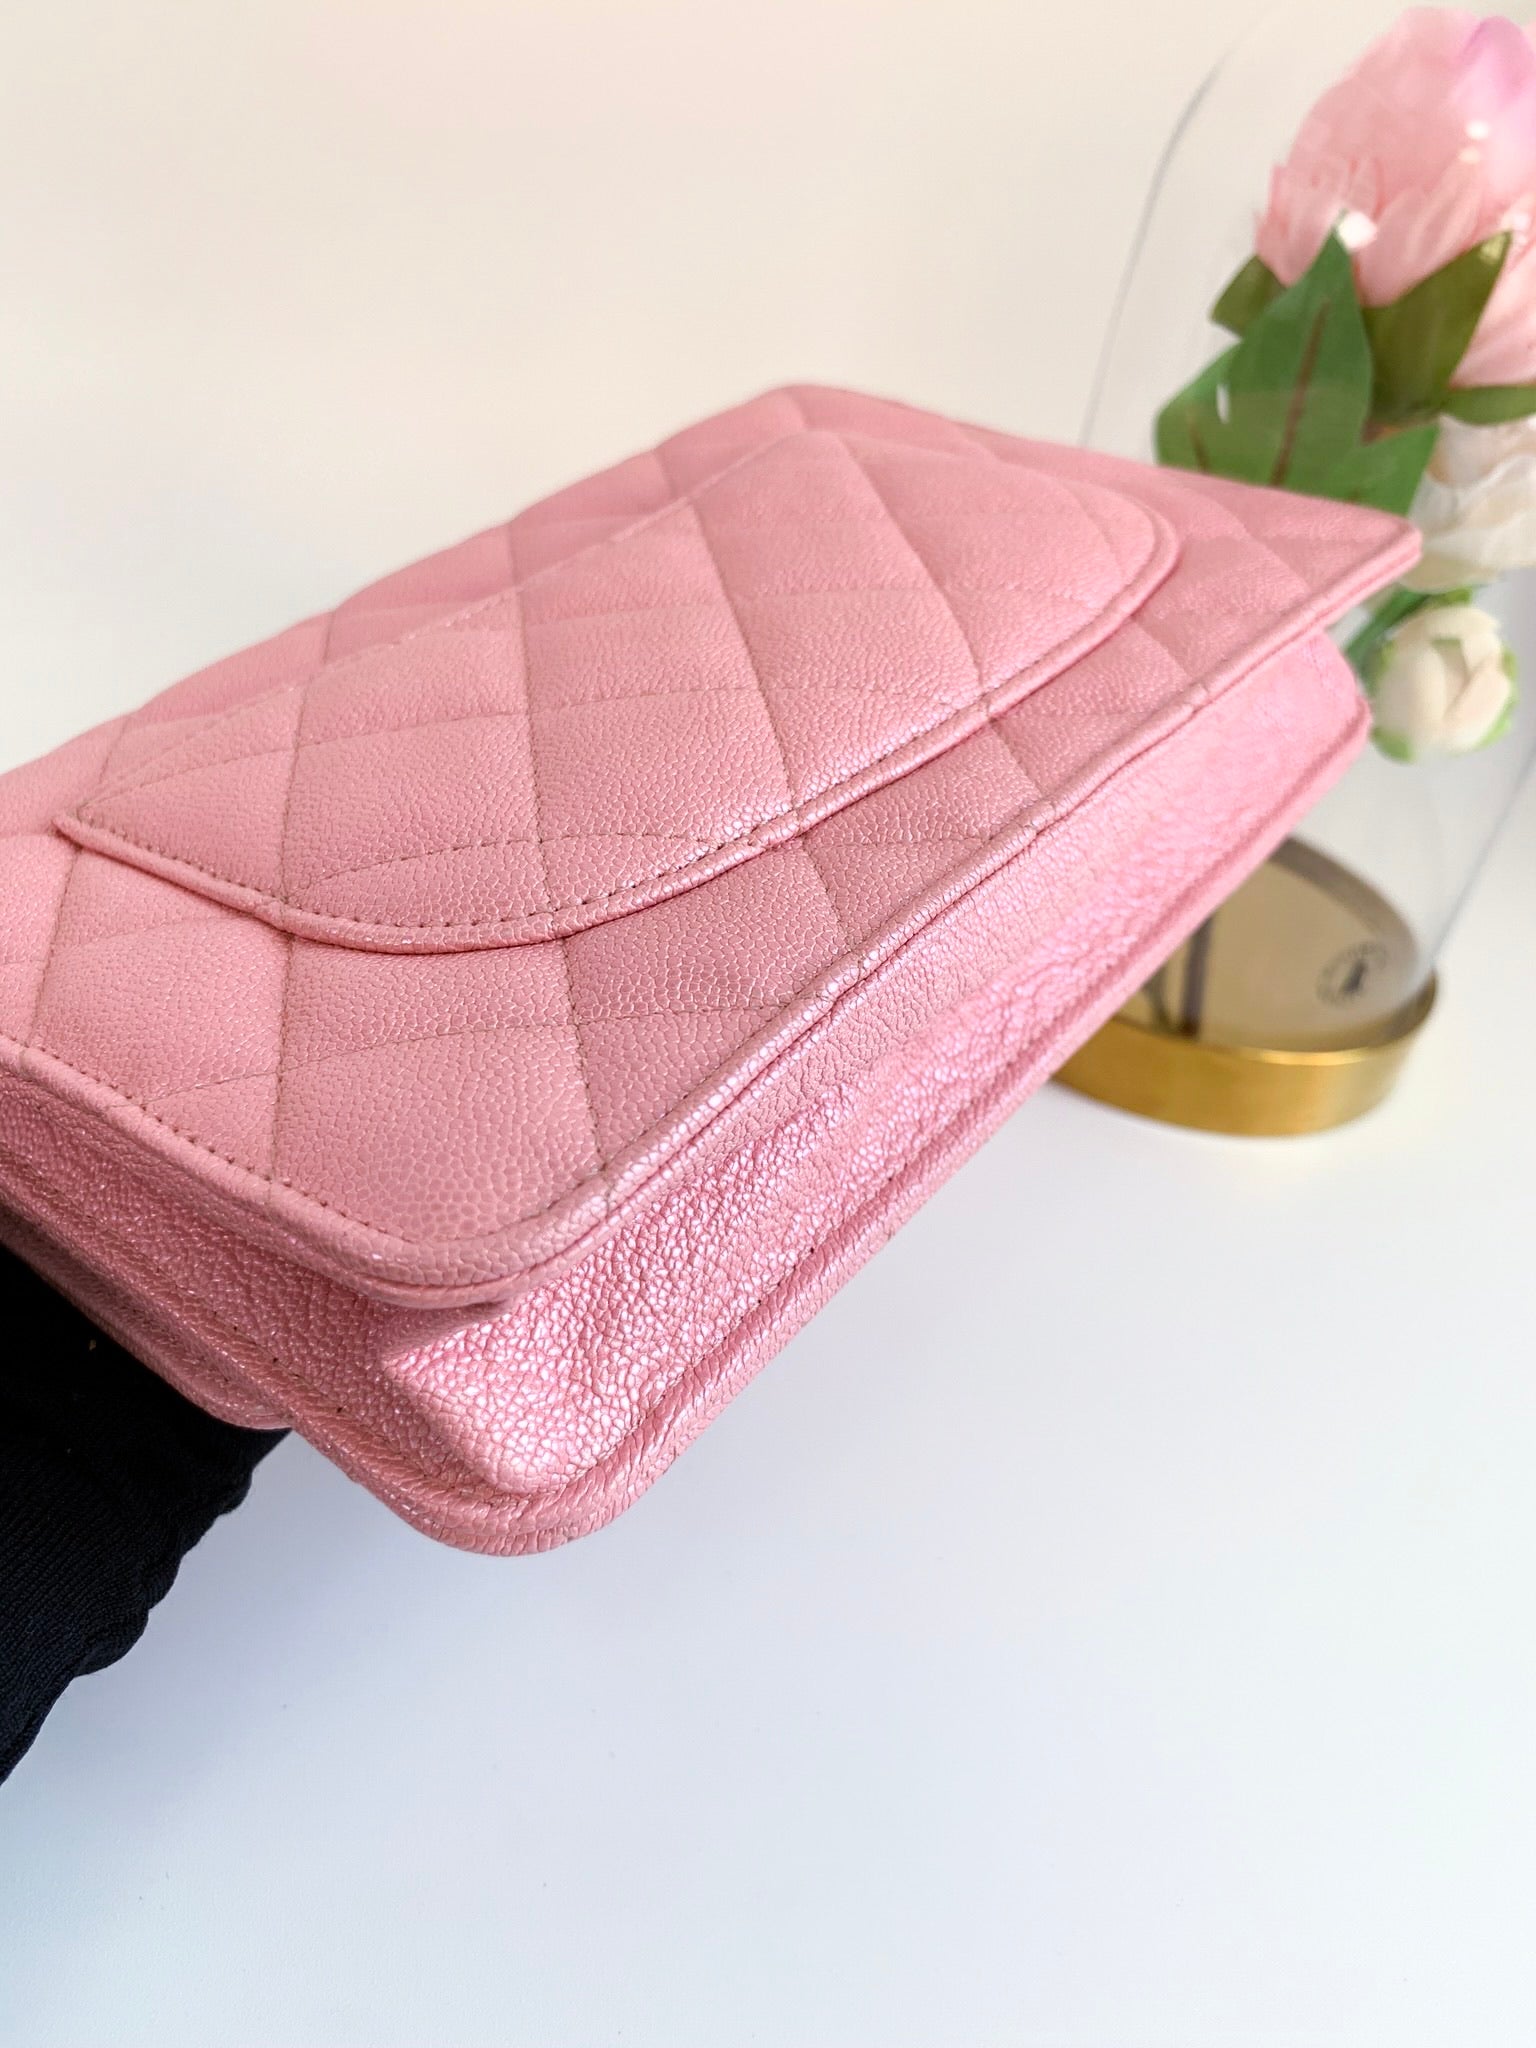 chanel black and pink wallet on